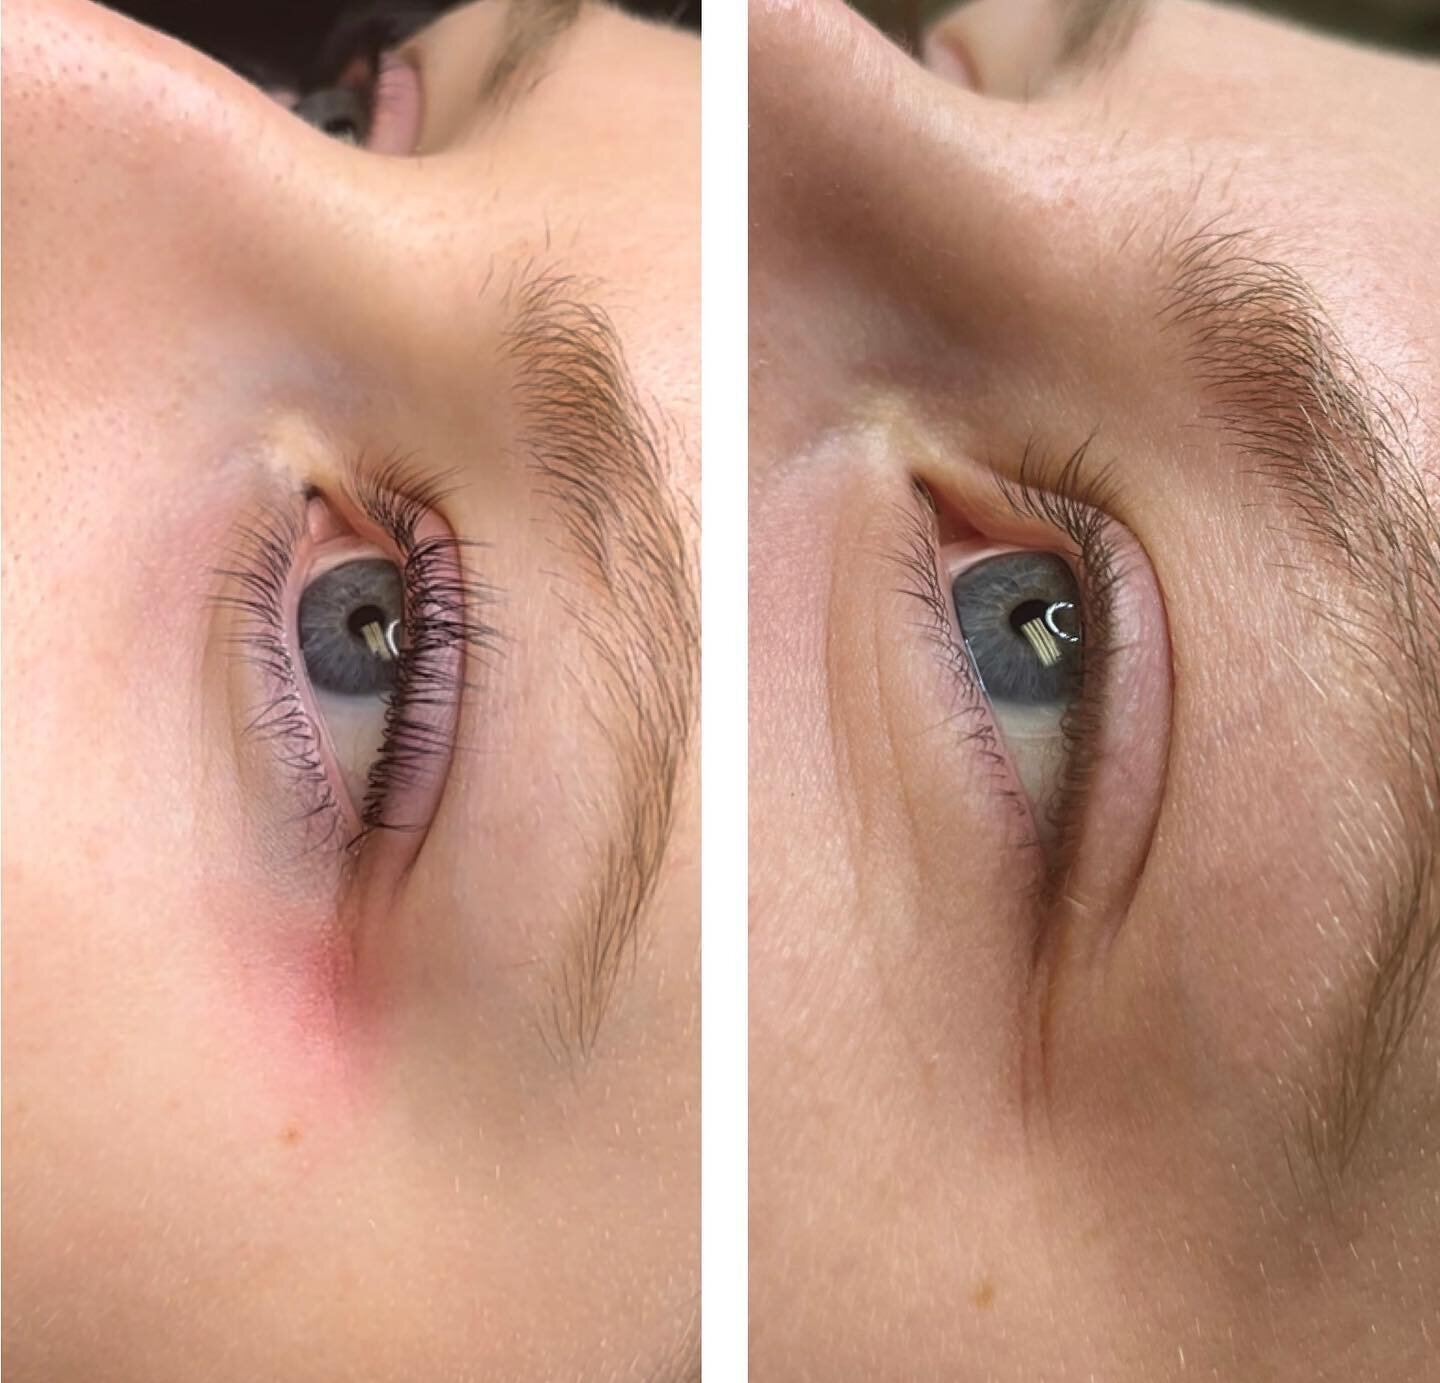 ⭐️ Before + After Lash Lift by @kellsesthetics ⭐️

Come see Kelly Thursday (4/13) in West Ashley to receive 20% off your brows!! *must mention this post to redeem* 

Call or book online 🌿

#getwaxed #brows #browwax #lashlift #chs #chsspringbreak #sp